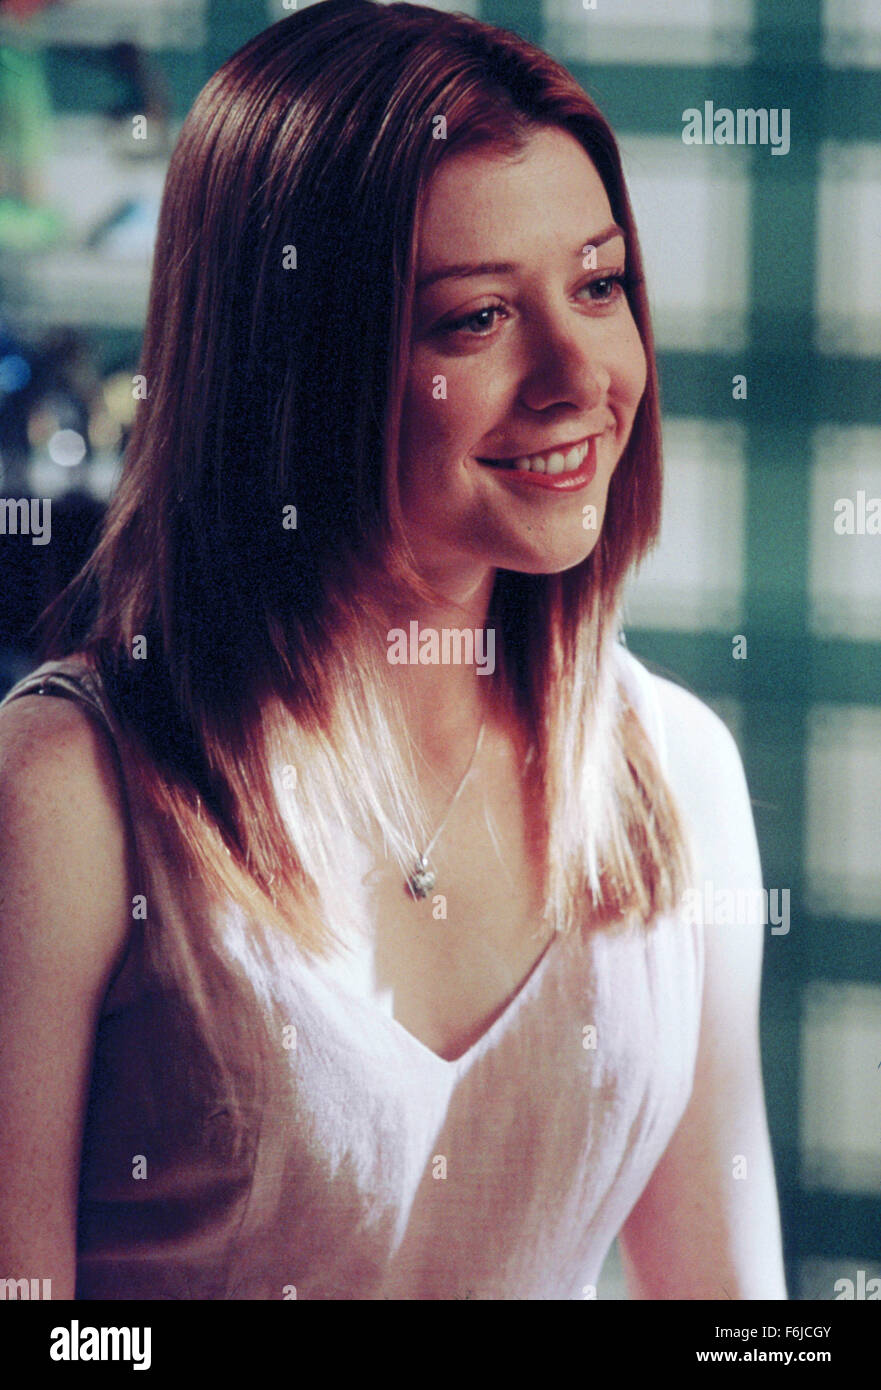 RELEASE DATE: July 24, 2003. MOVIE TITLE: American Wedding. STUDIO: Universal Studios. PLOT: The third film in the American Pie series deals with the wedding of Jim and Michelle and the gathering of their families and friends, including Jim's old friends from high school and Michelle's little sister. PICTURED:  ALYSON HANNIGAN as Michelle Flaherty. Stock Photo